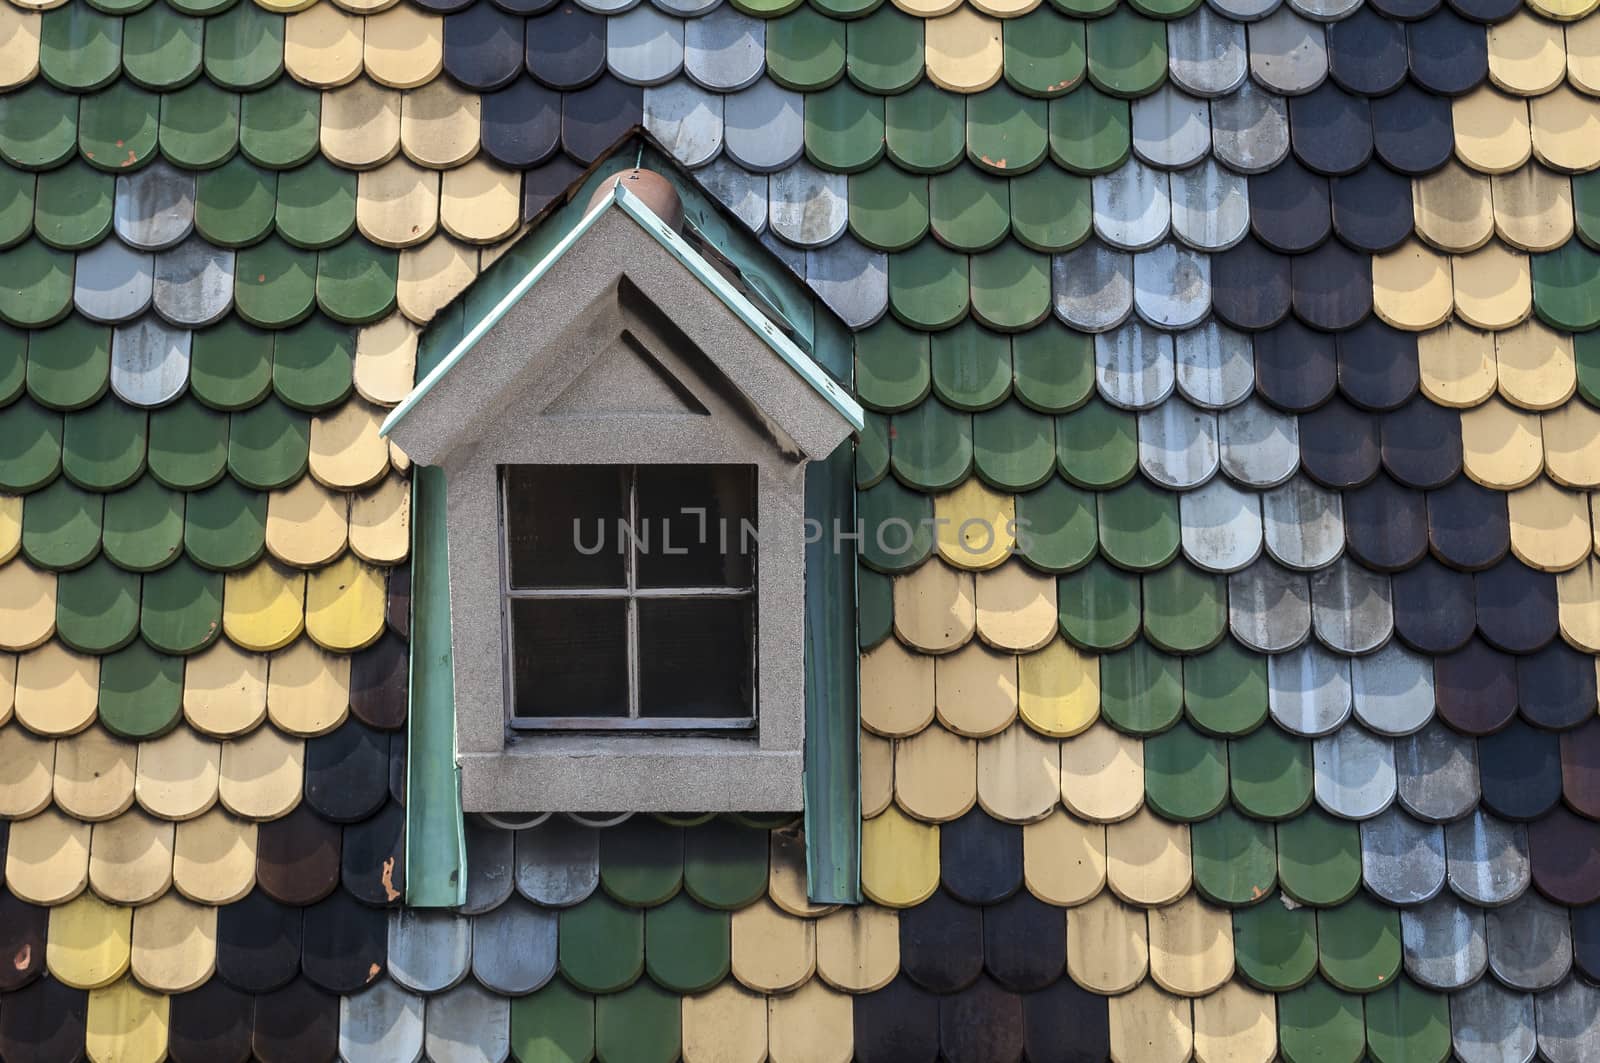 Detailed view of colorful roof shingles and window.